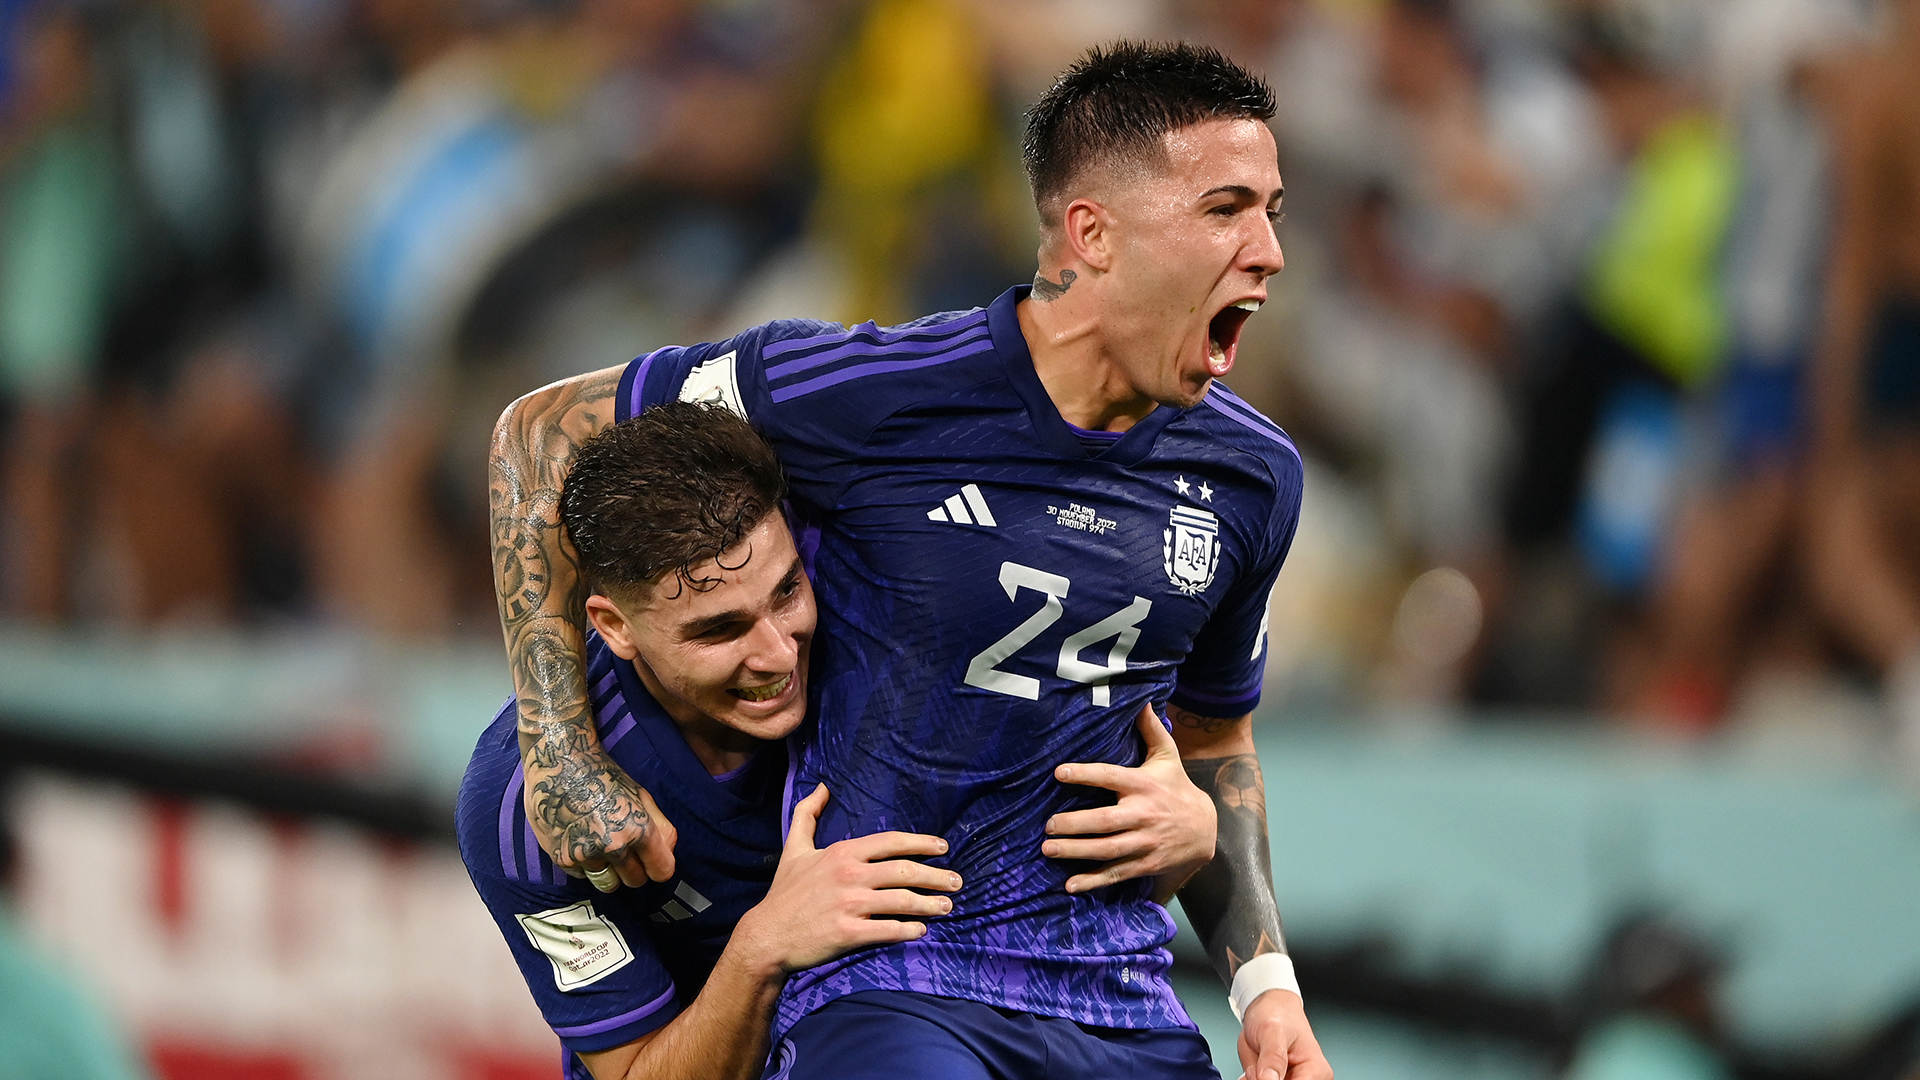 Julian Alvarez of Argentina celebrates with Enzo Fernandez after scoring their team's second goal during the FIFA World Cup Qatar 2022 Group C match between Poland and Argentina at Stadium 974 on November 30, 2022 in Doha, Qatar.